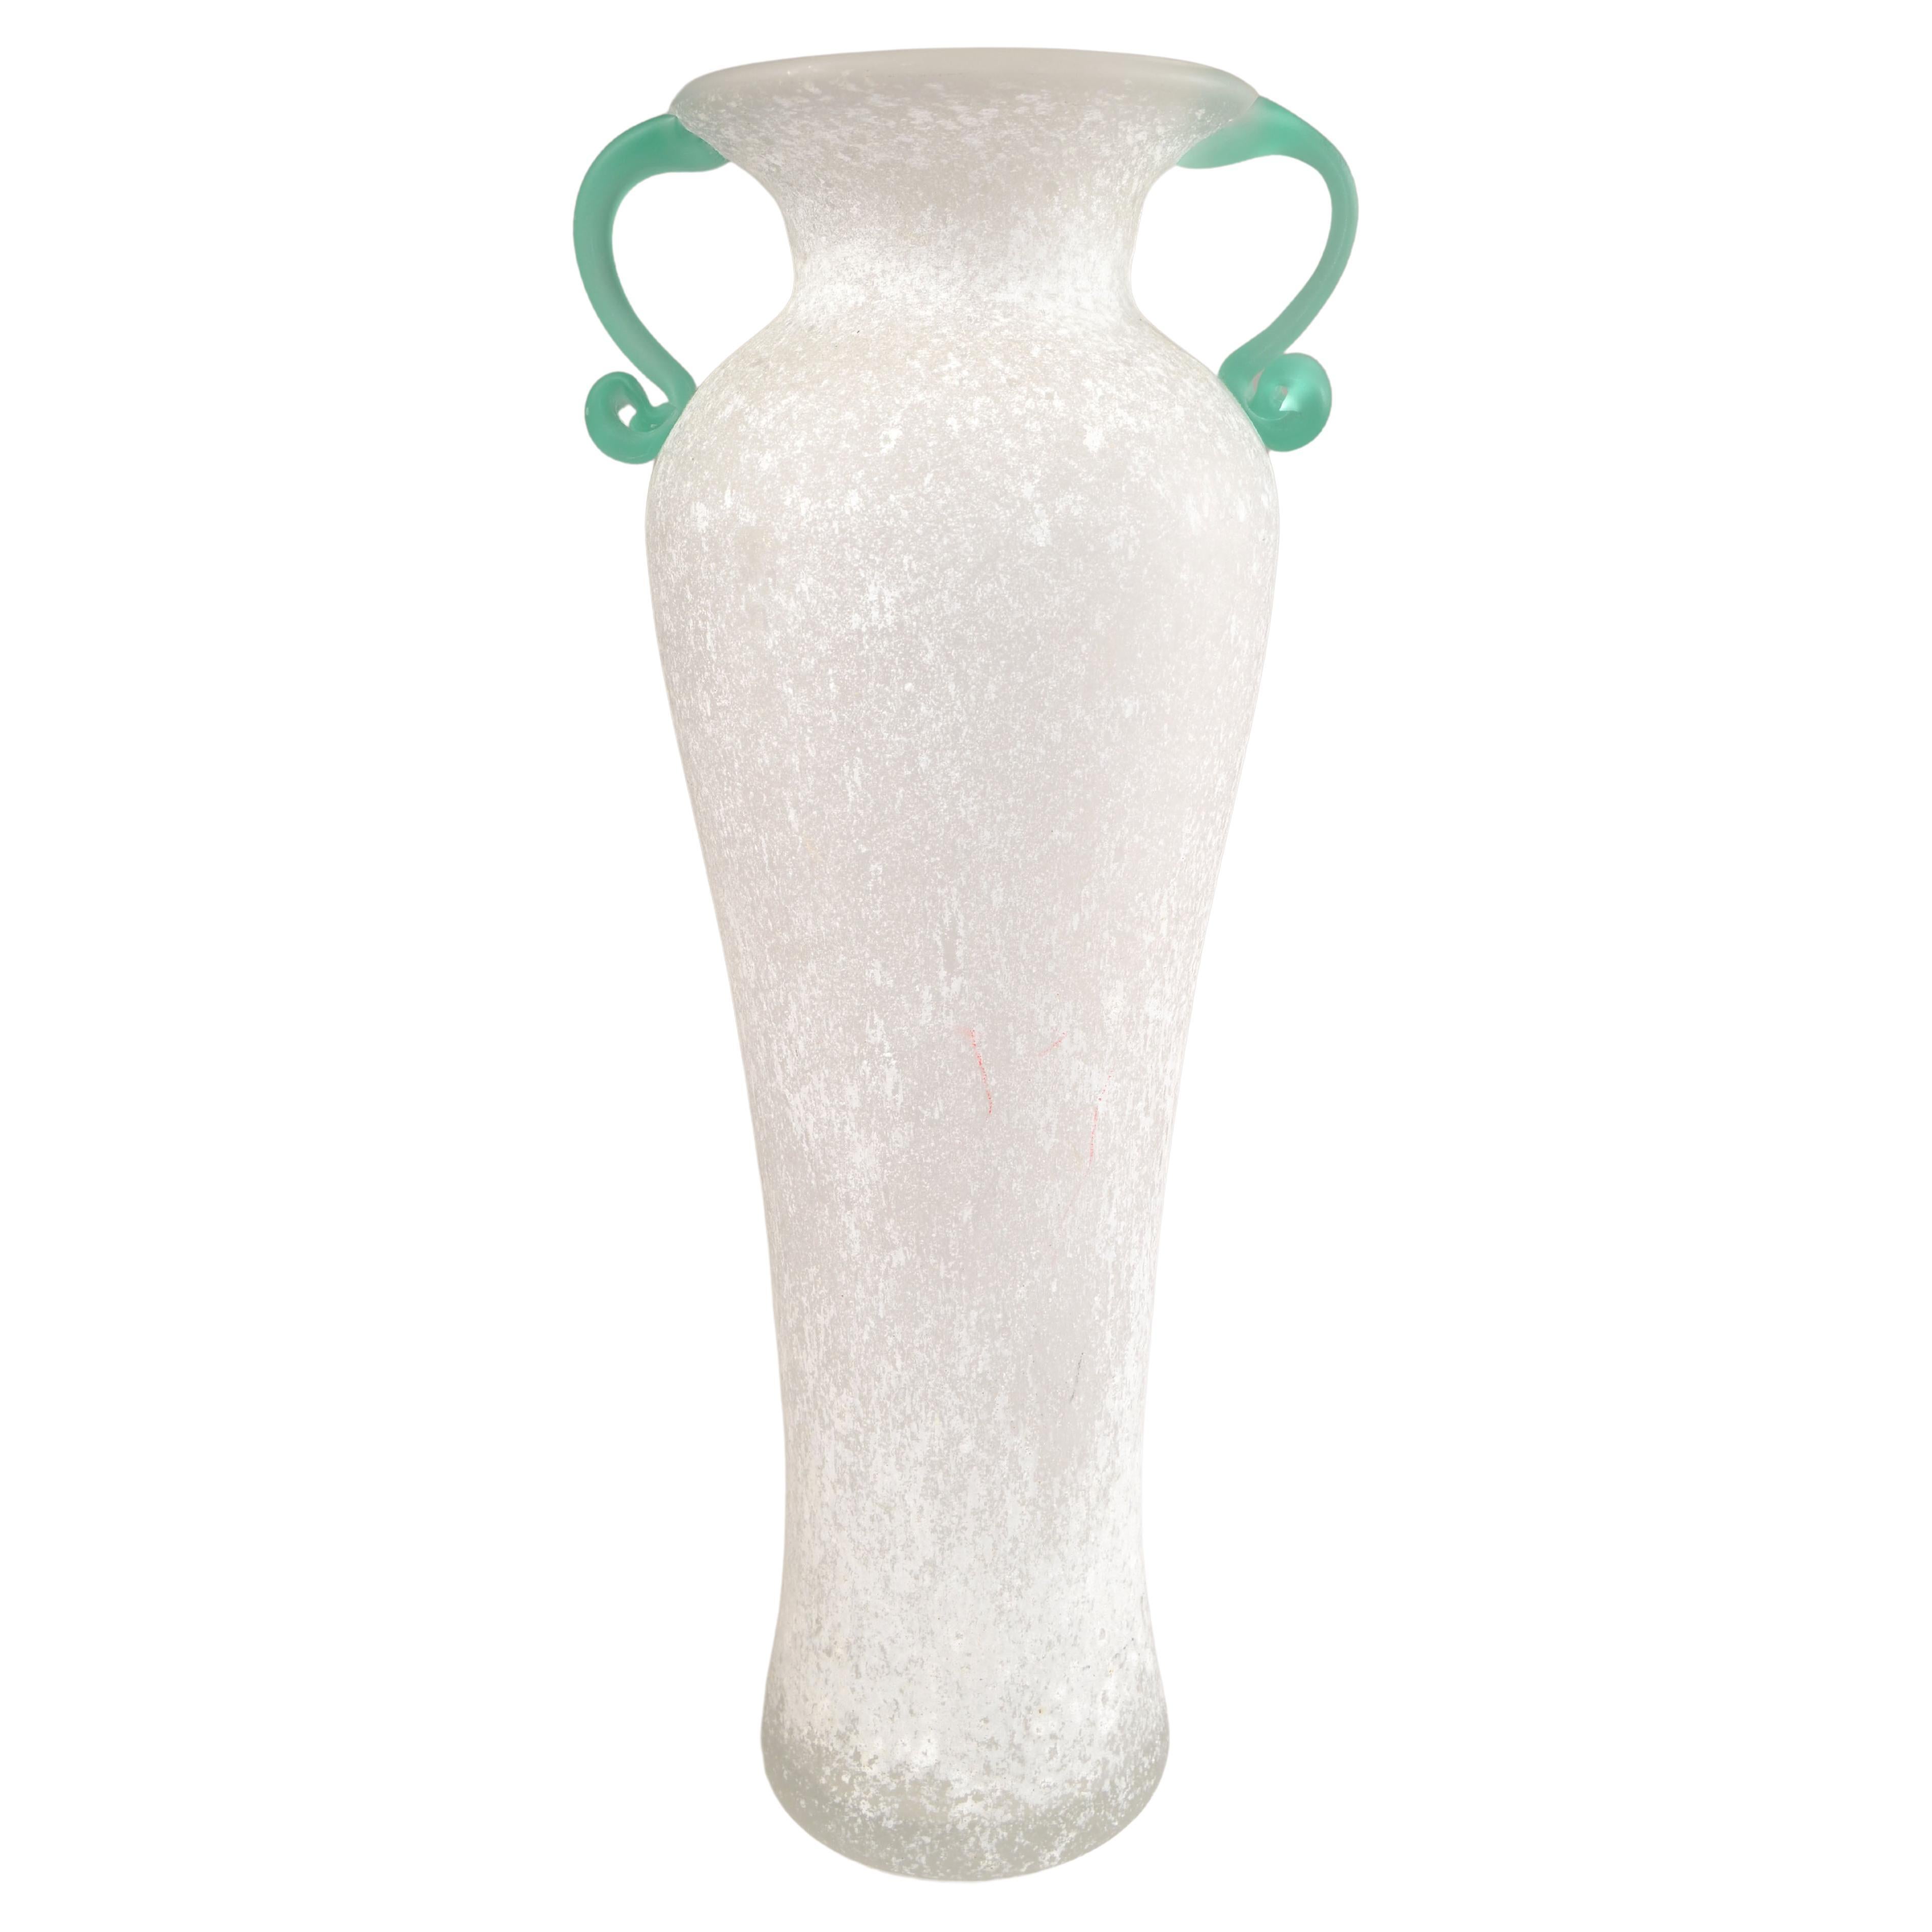 Tall Archimede Seguso Scavo Bianco Flower Vase Italy White & Mint Green Handles  For Sale